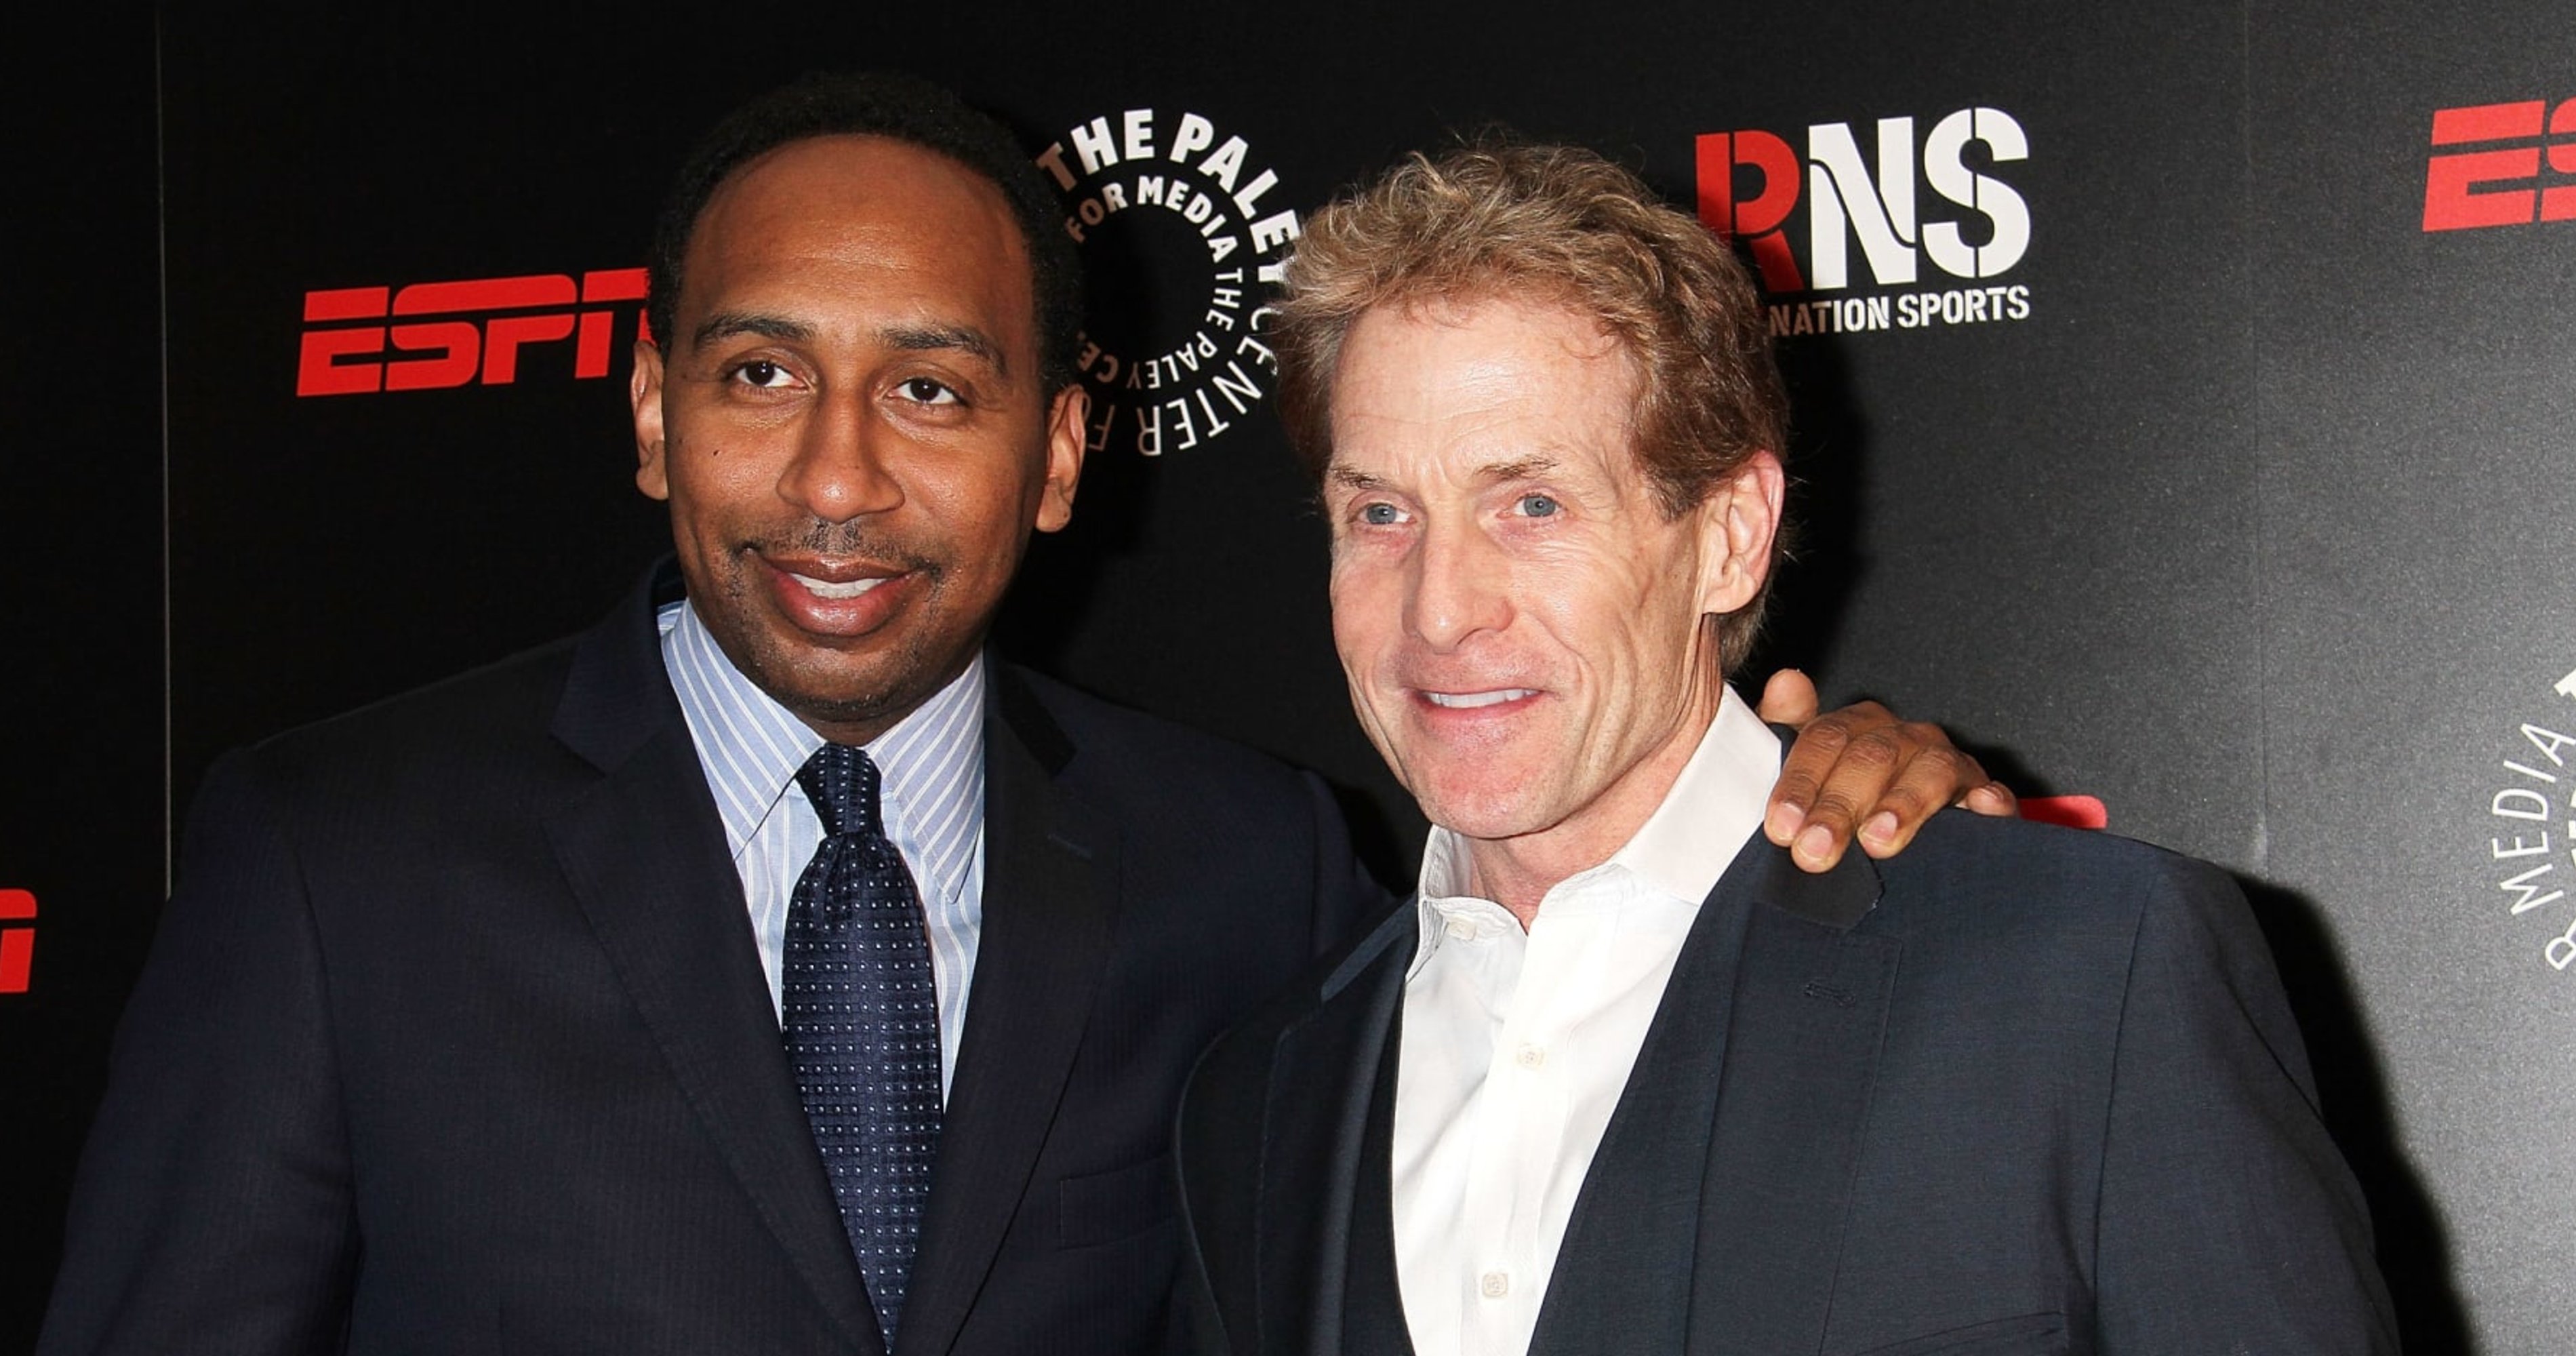 Skip Bayless Won't Be Pursued by ESPN for 'First Take' Amid Rumored FS1 Exit